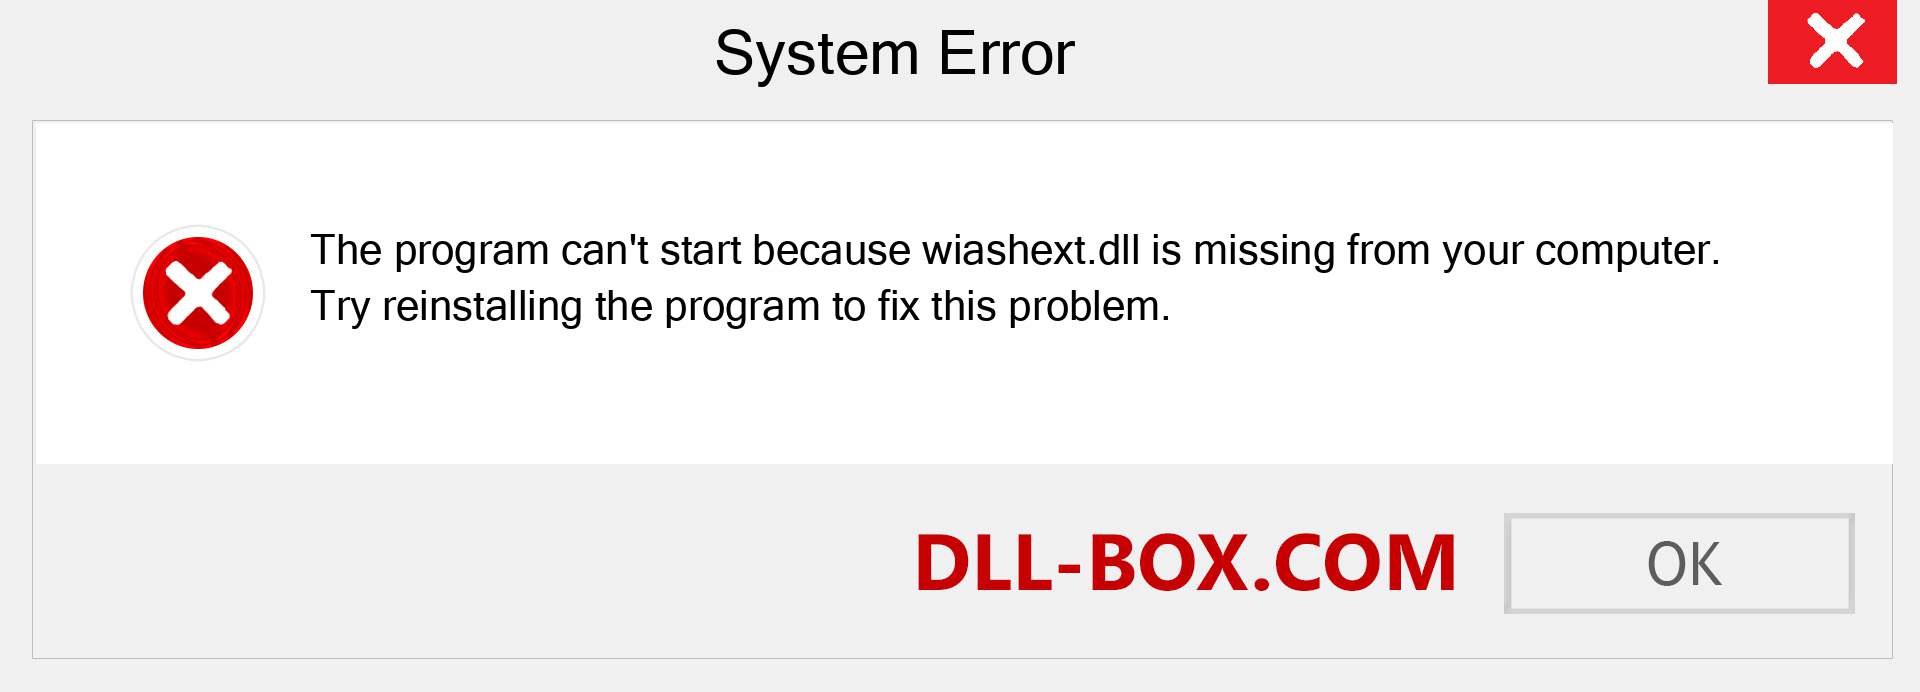  wiashext.dll file is missing?. Download for Windows 7, 8, 10 - Fix  wiashext dll Missing Error on Windows, photos, images